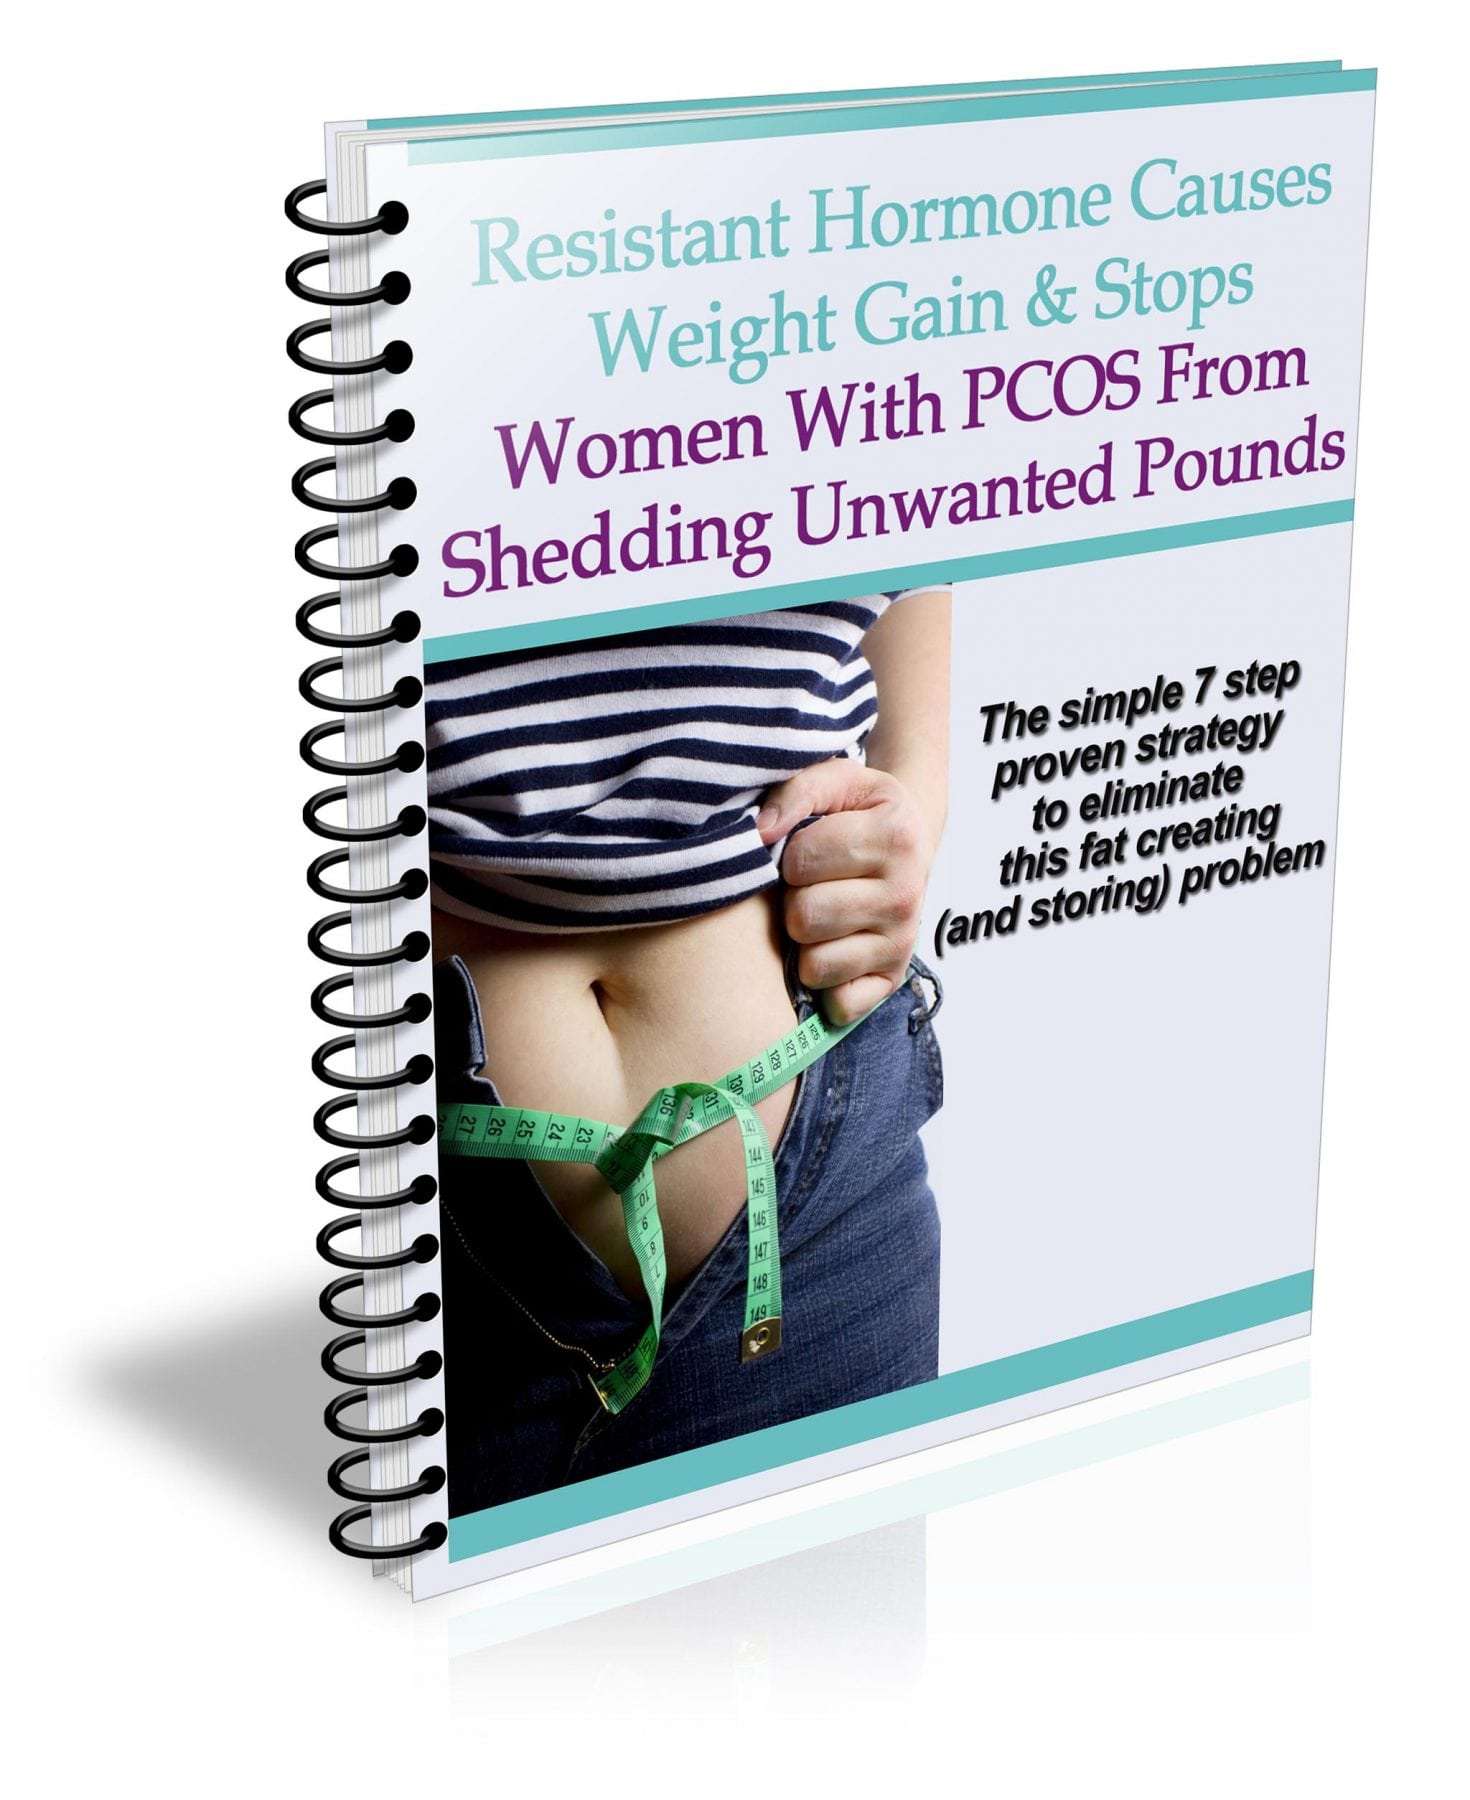 Two secret keys to PCOS weight loss success